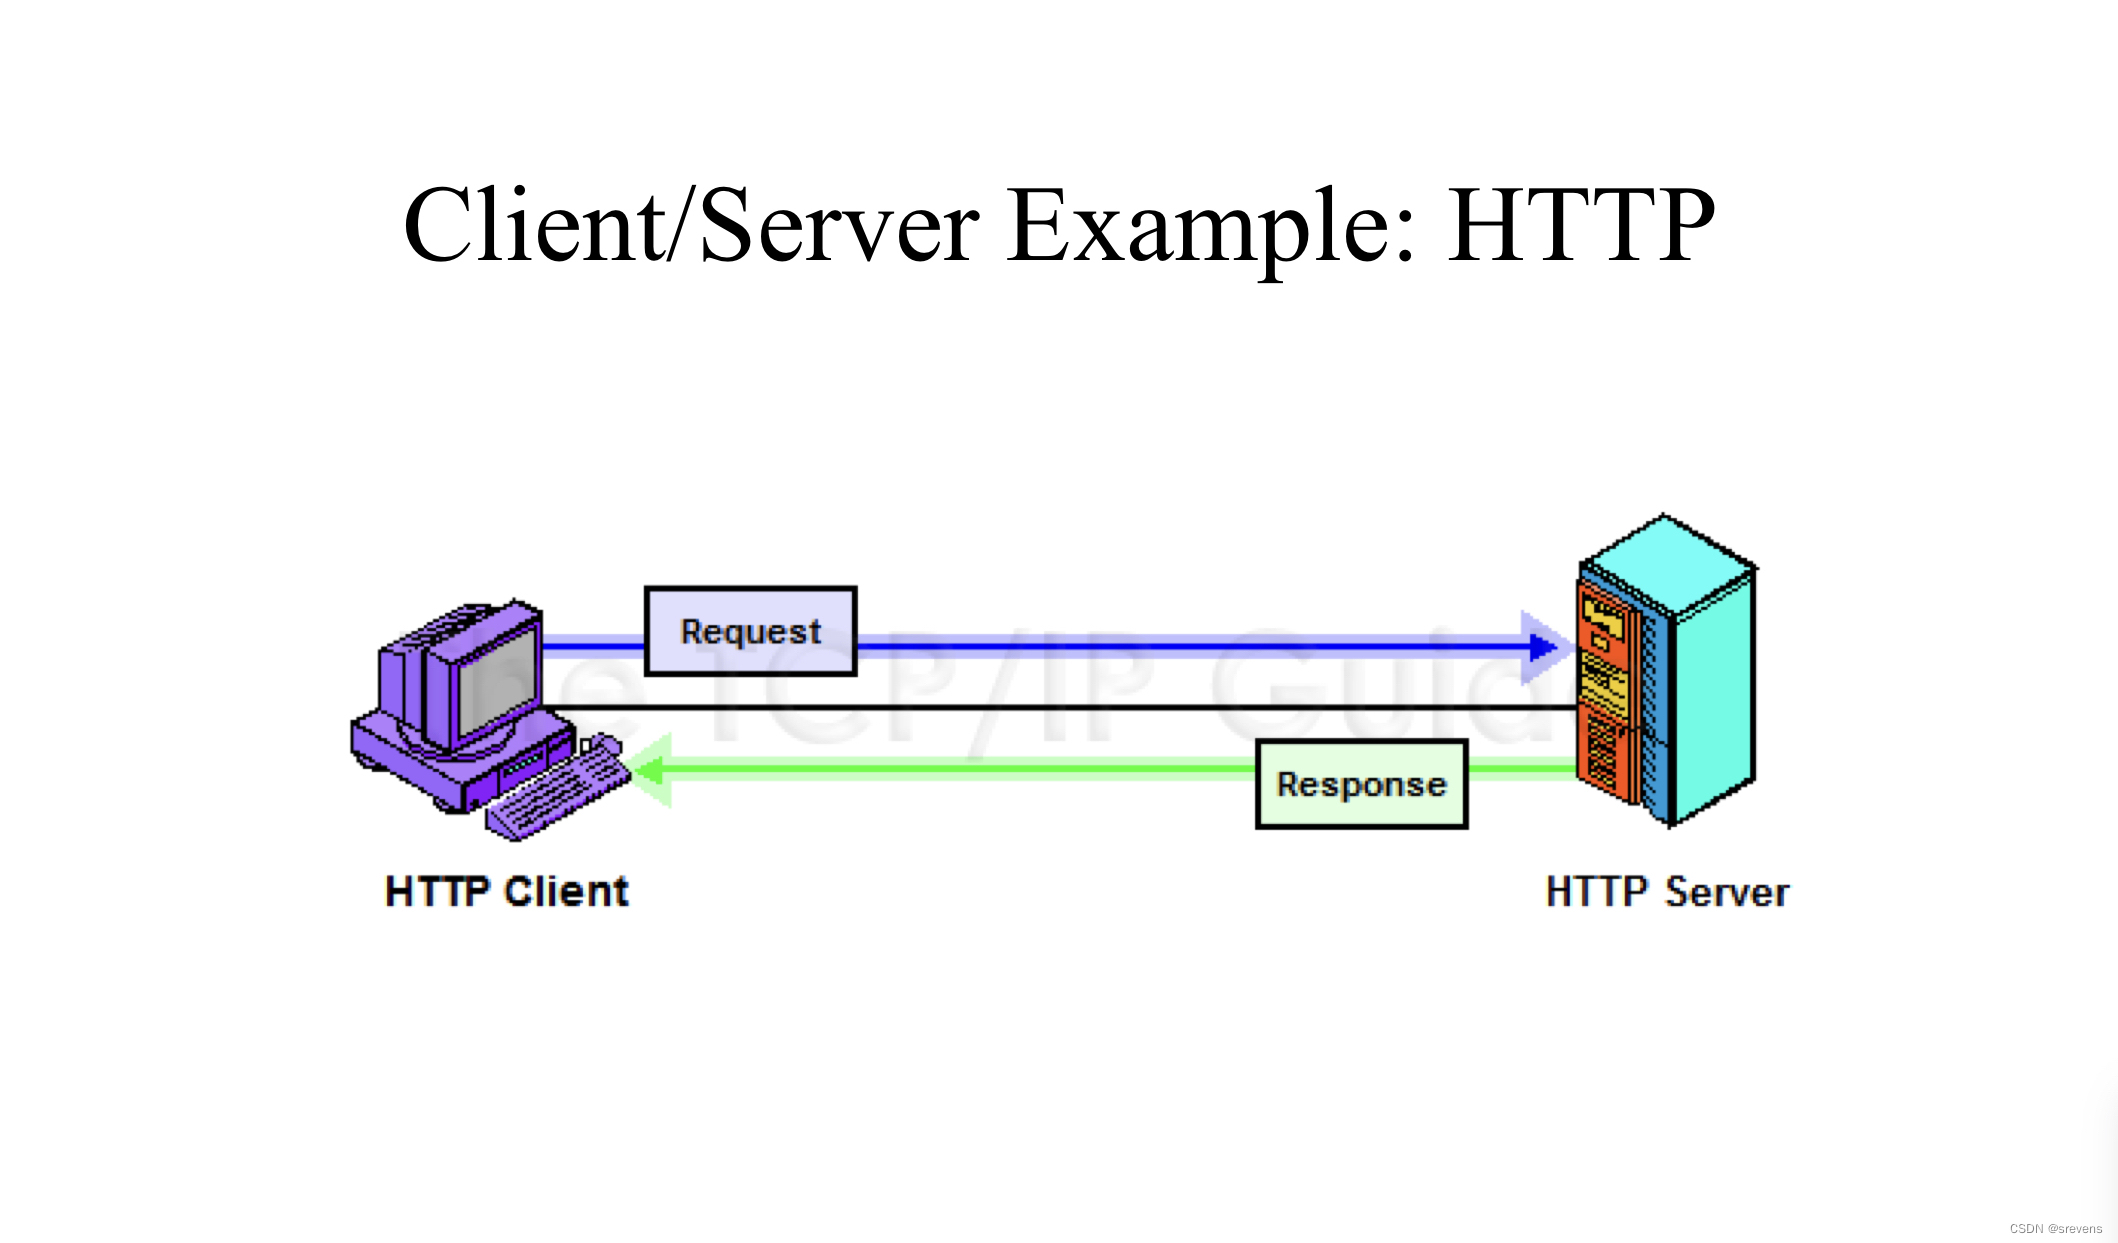 Client/Server Example: HTTP